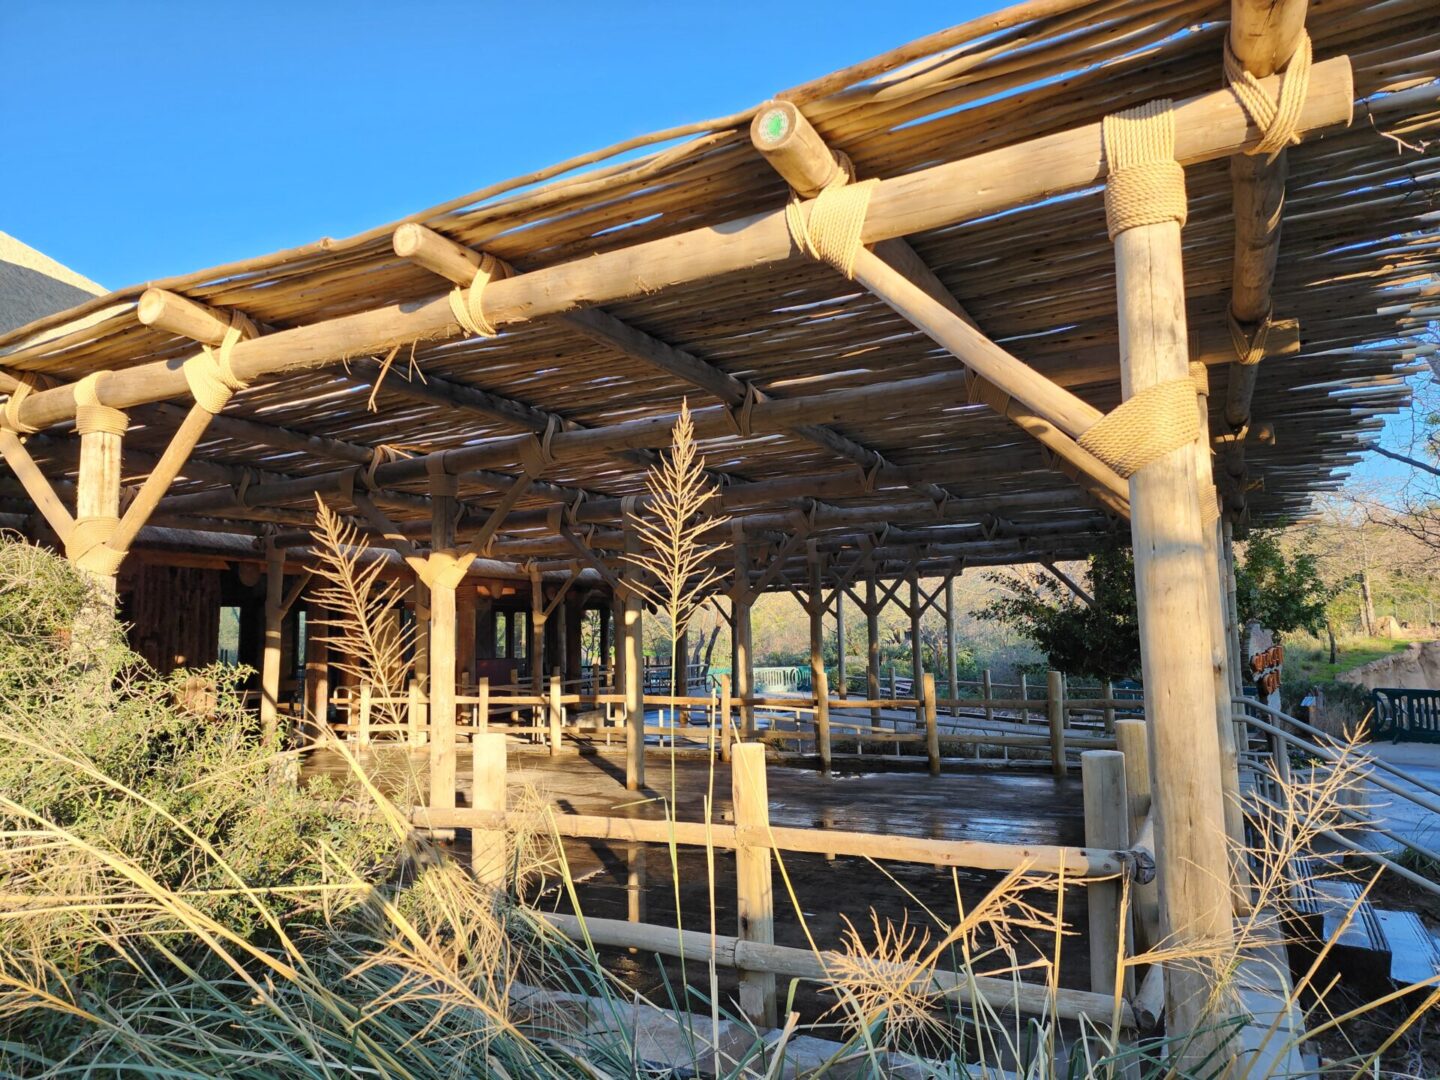 The zoo has a wooden structure with bamboo poles.